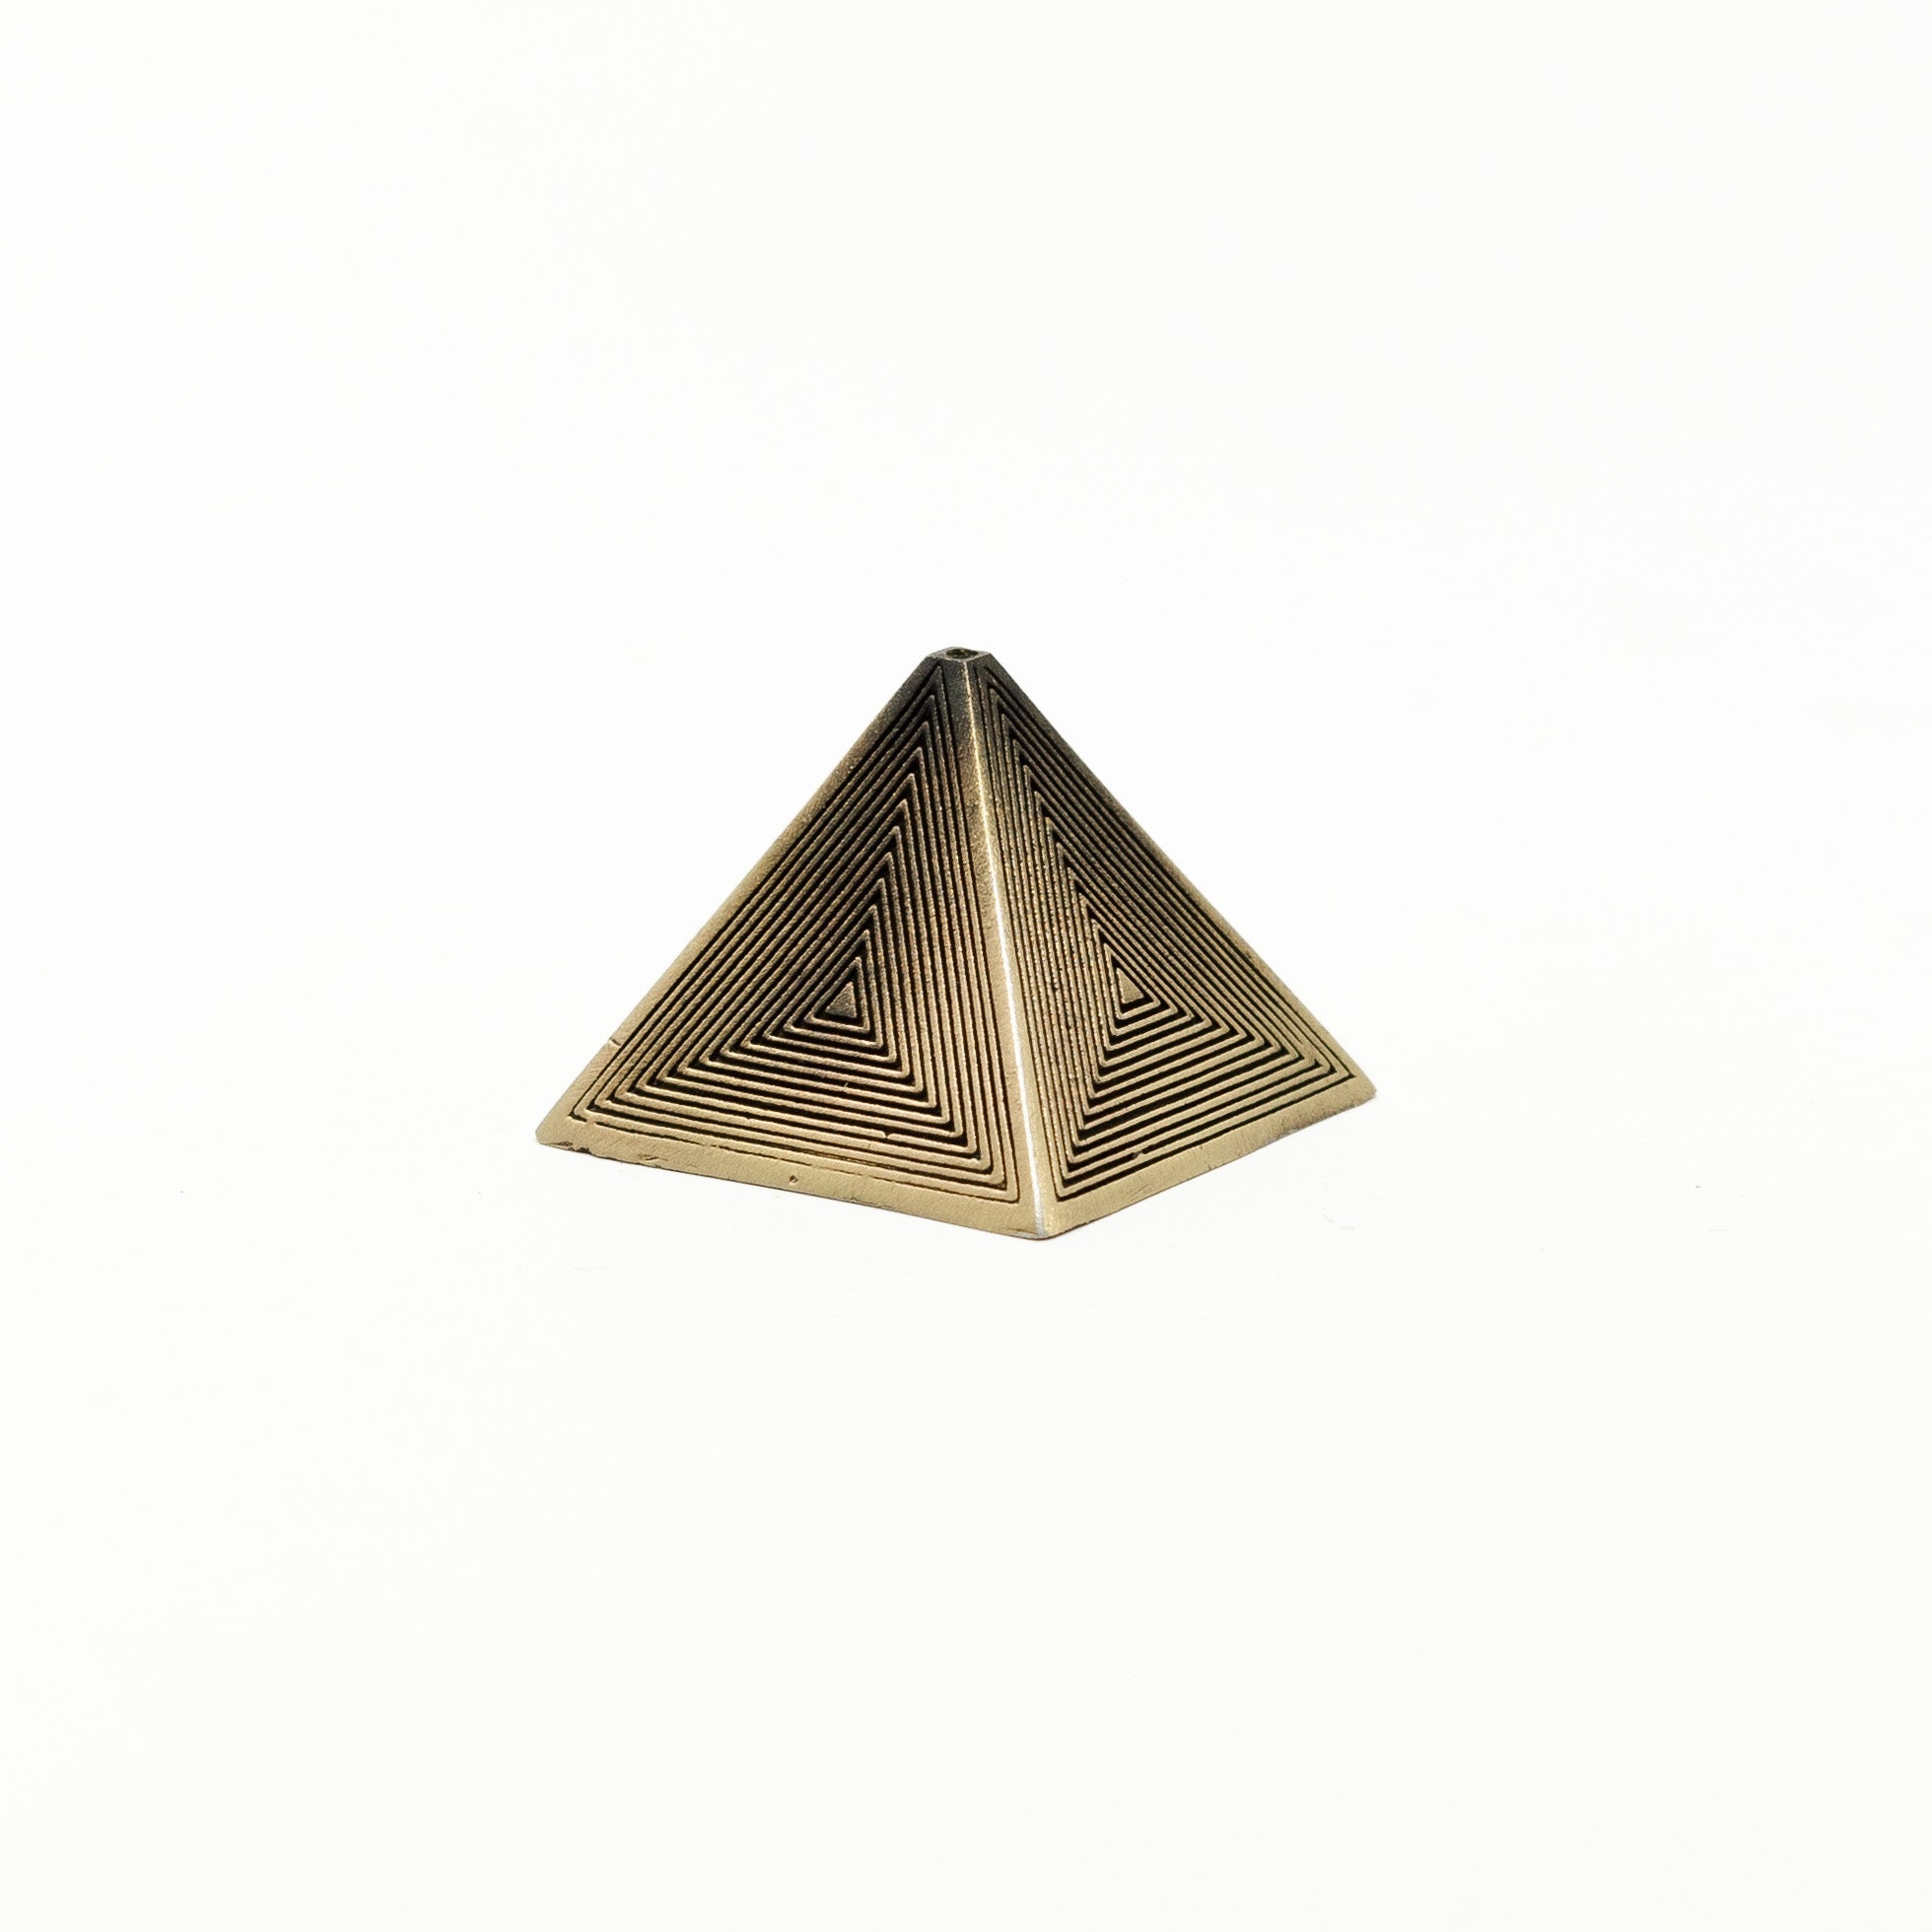 MAAPS The Pyramid Incense Holder